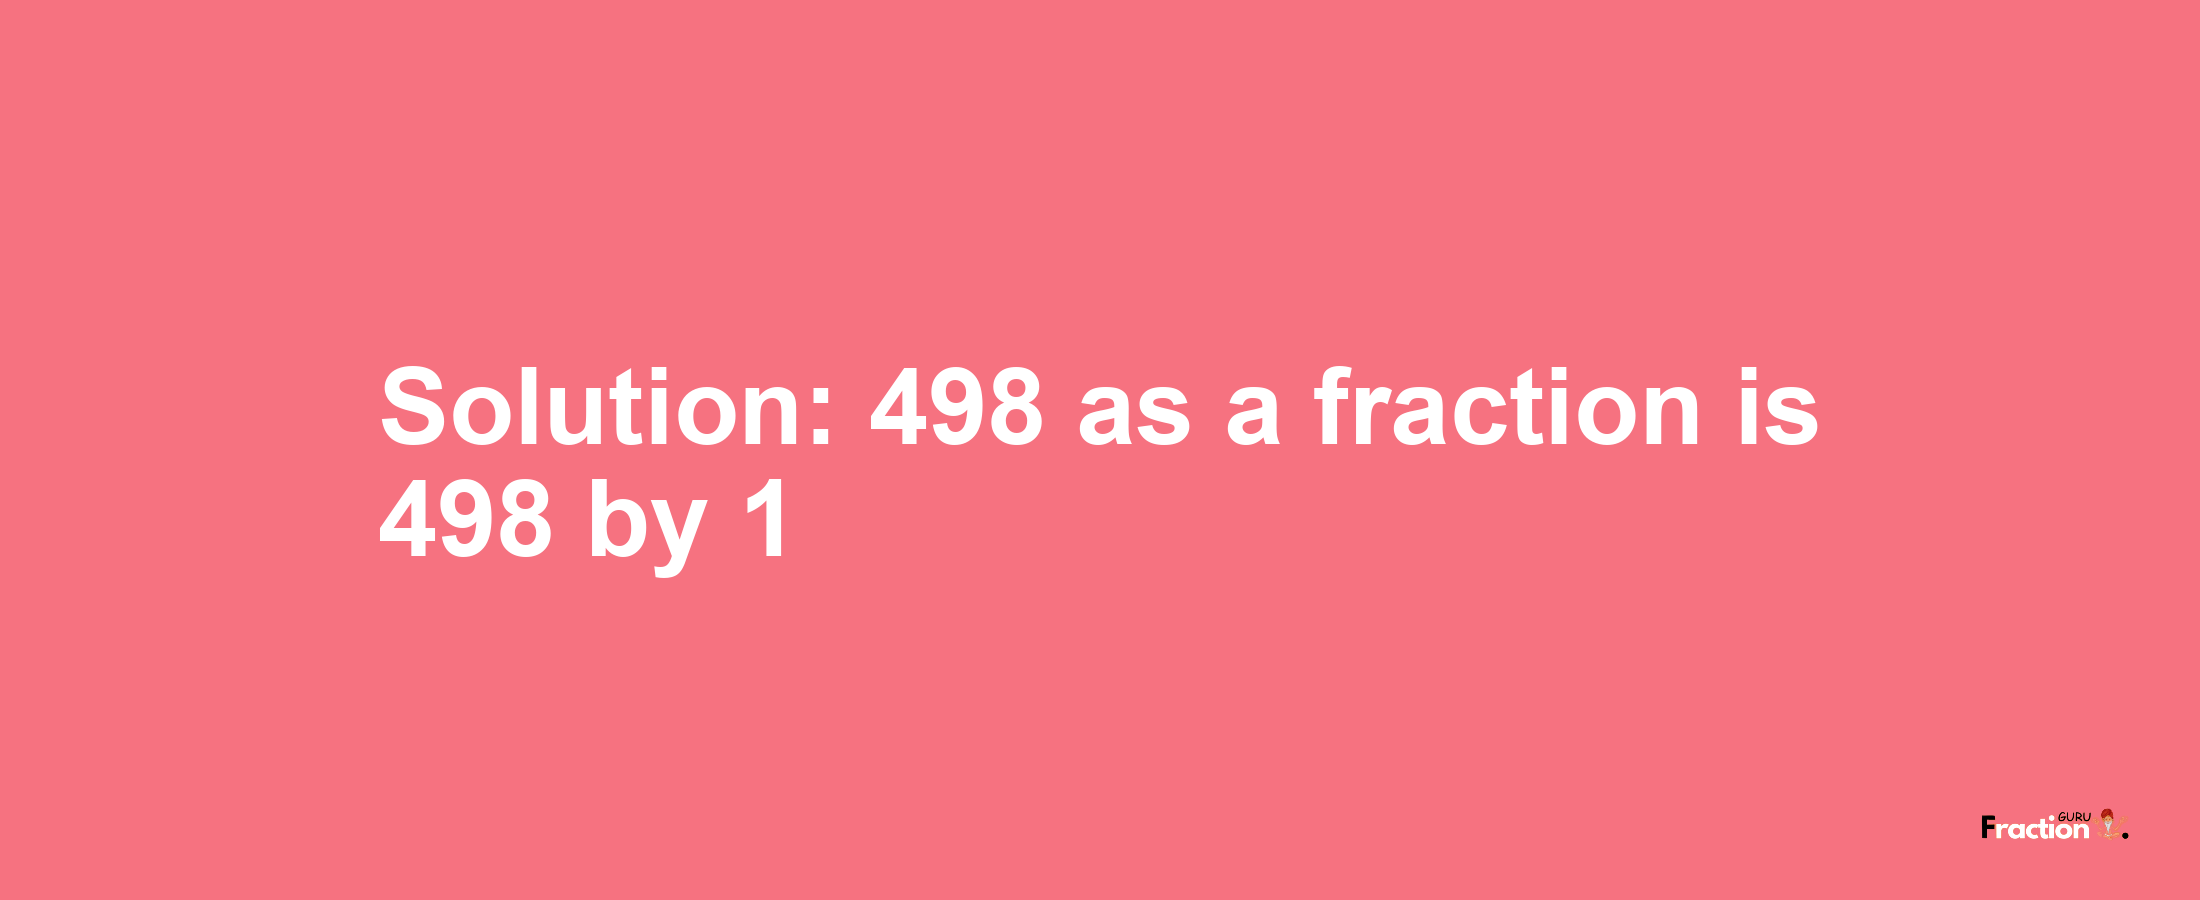 Solution:498 as a fraction is 498/1